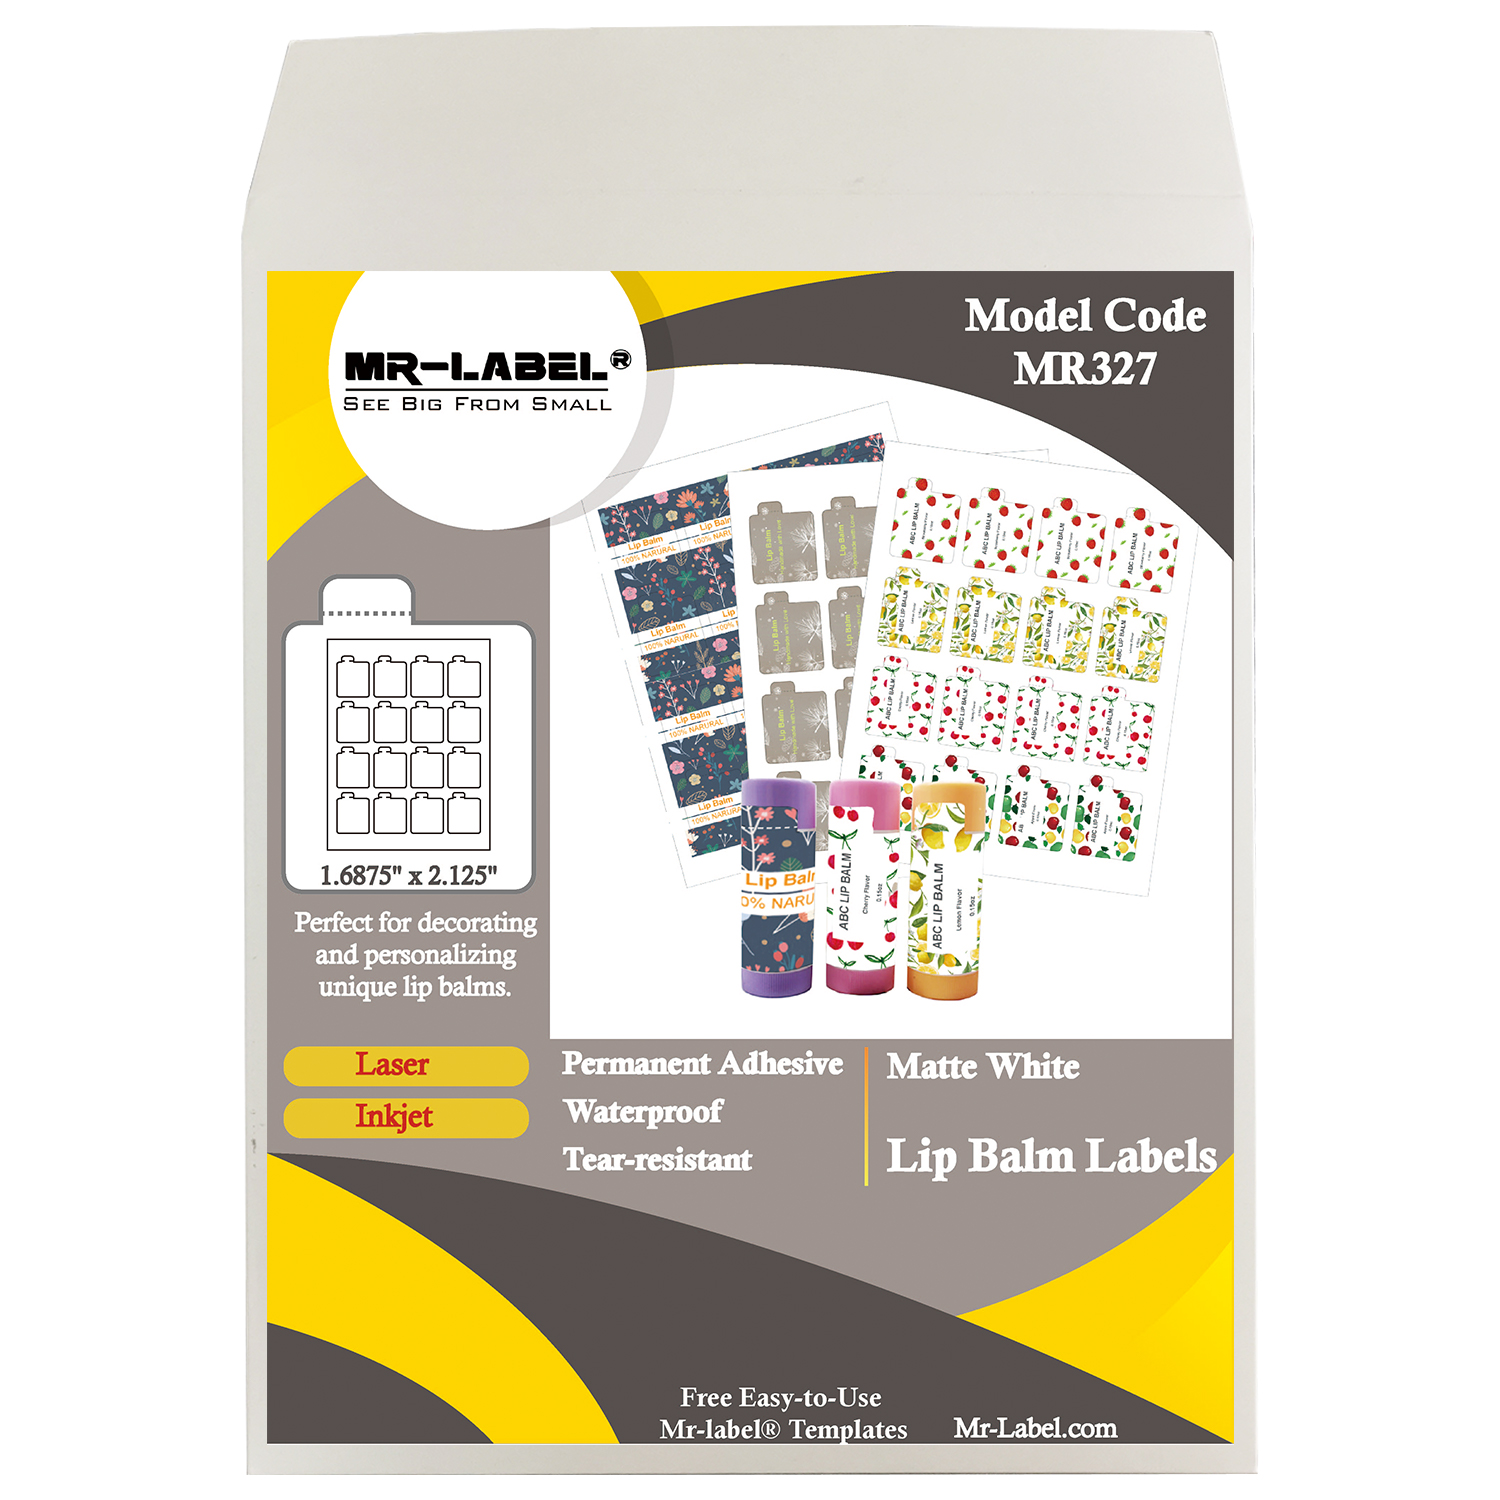 MR-Label White Lip Balm Labels with Tamper Tab – Waterproof & Tear Inside 2.125 X 1.6875 Label Template